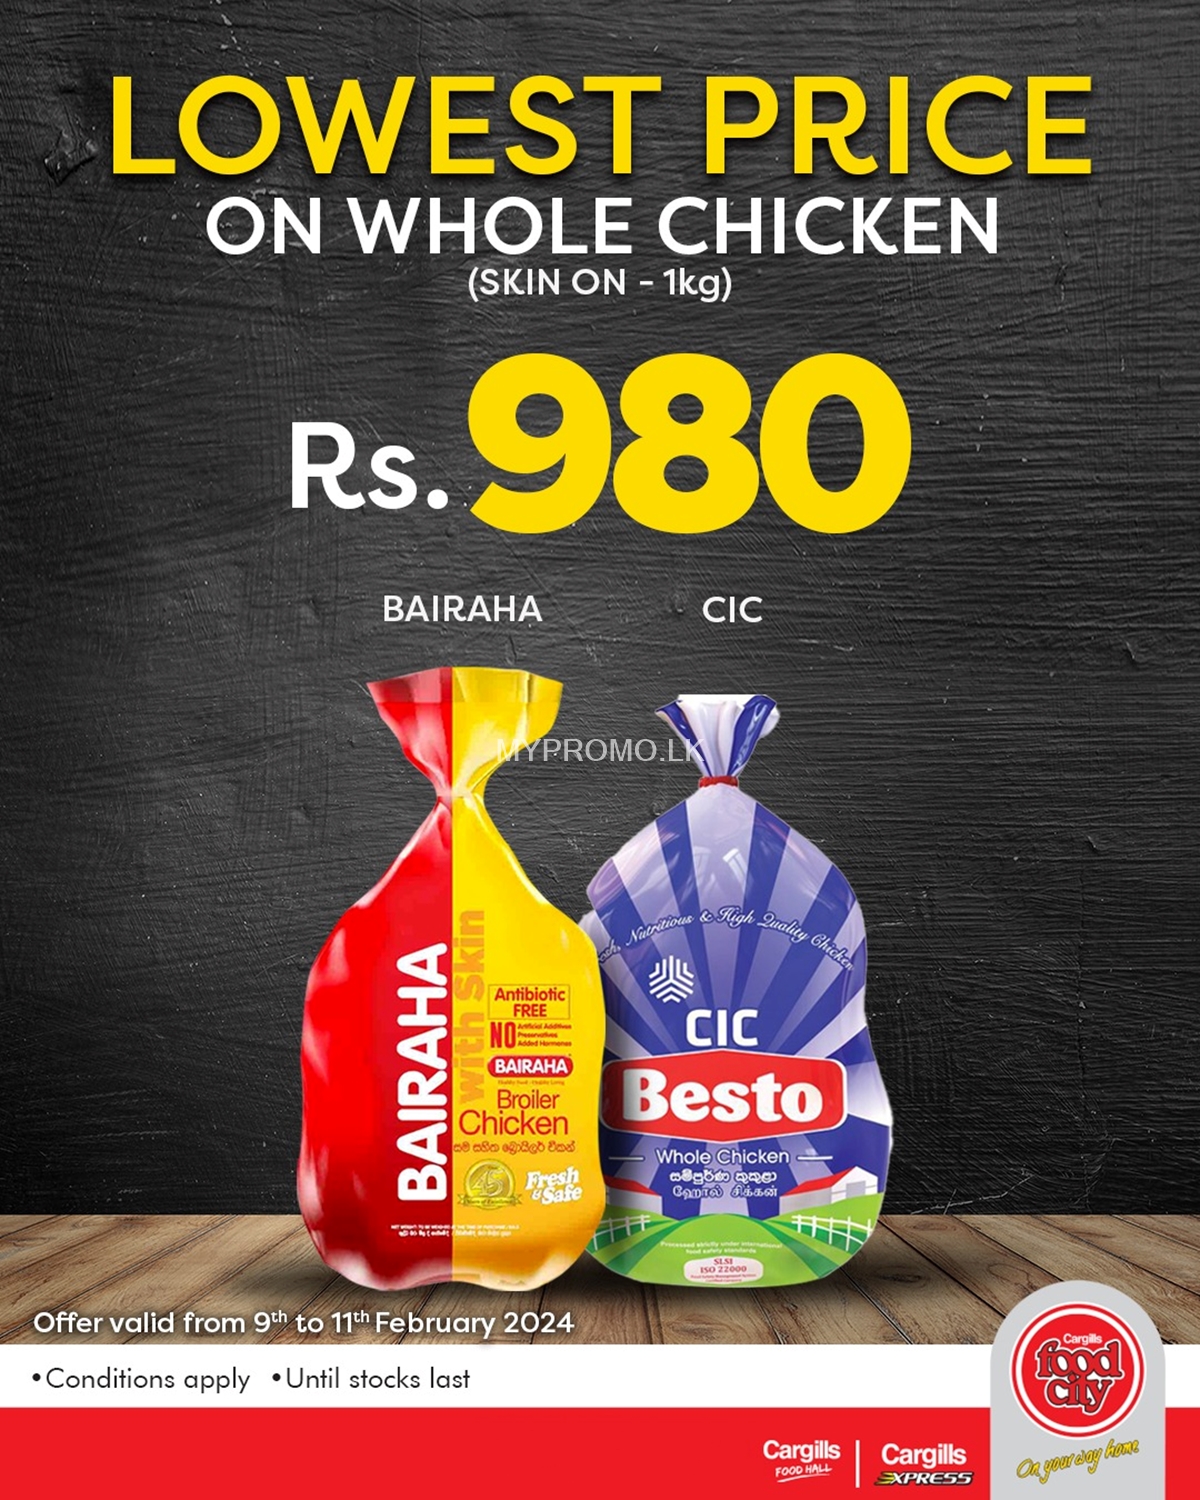 Enjoy the lowest price whole chicken at just Rs.980 at Cargills Food City